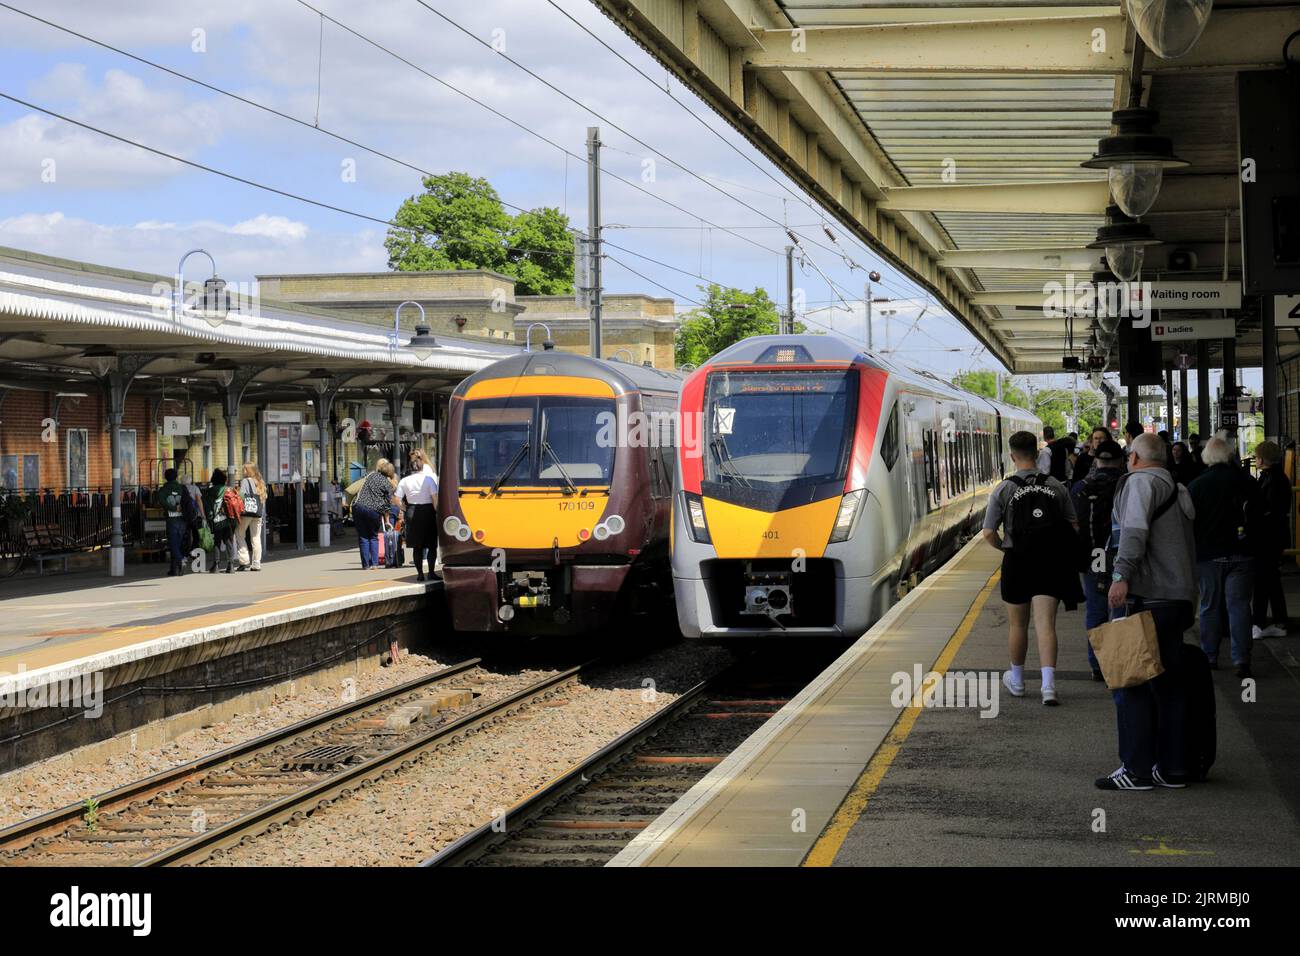 Greateranglia trains Class 755 and C2C 170 class Turbostar Train at Ely station, Ely city, Cambridgeshire, England Stock Photo